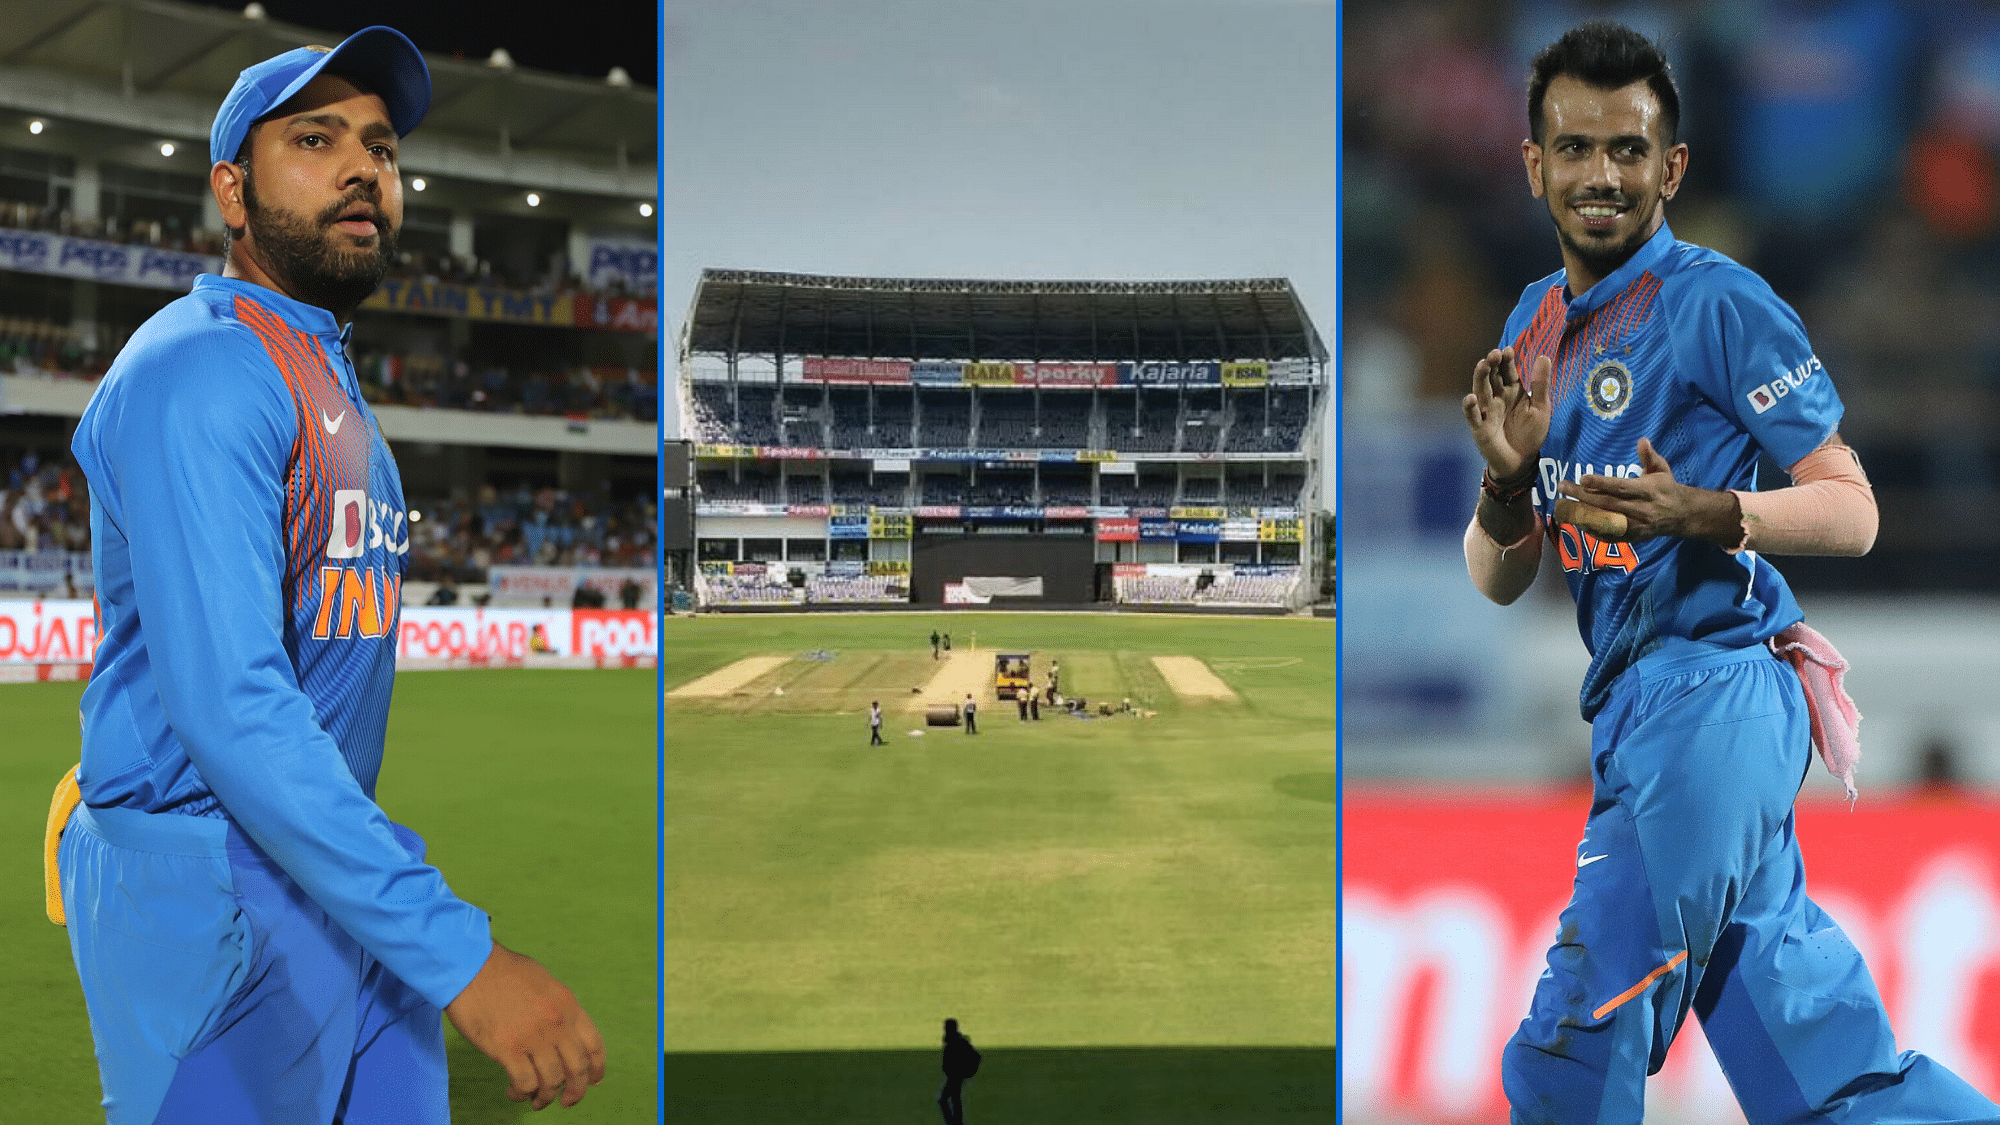 Rohit Sharma and in-form leggie Yuzvendra Chahal would be eyeing personal milestone in the series decider.